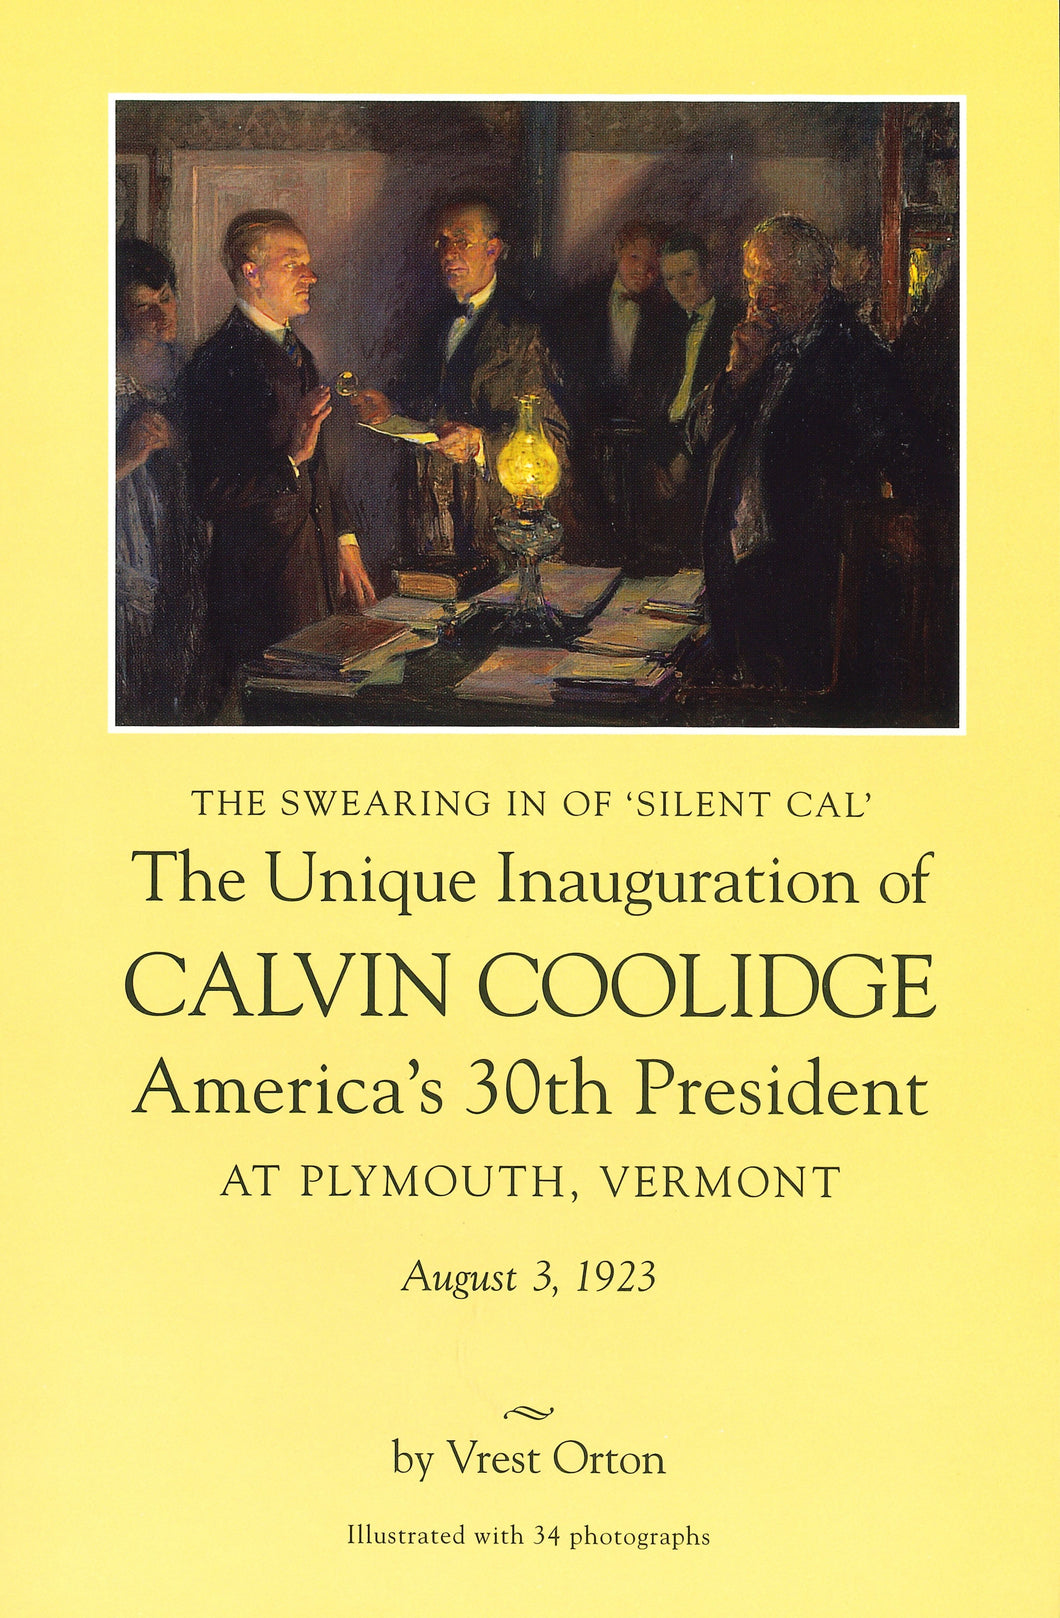 The Unique Inauguration of Calvin Coolidge by Vrest Orton